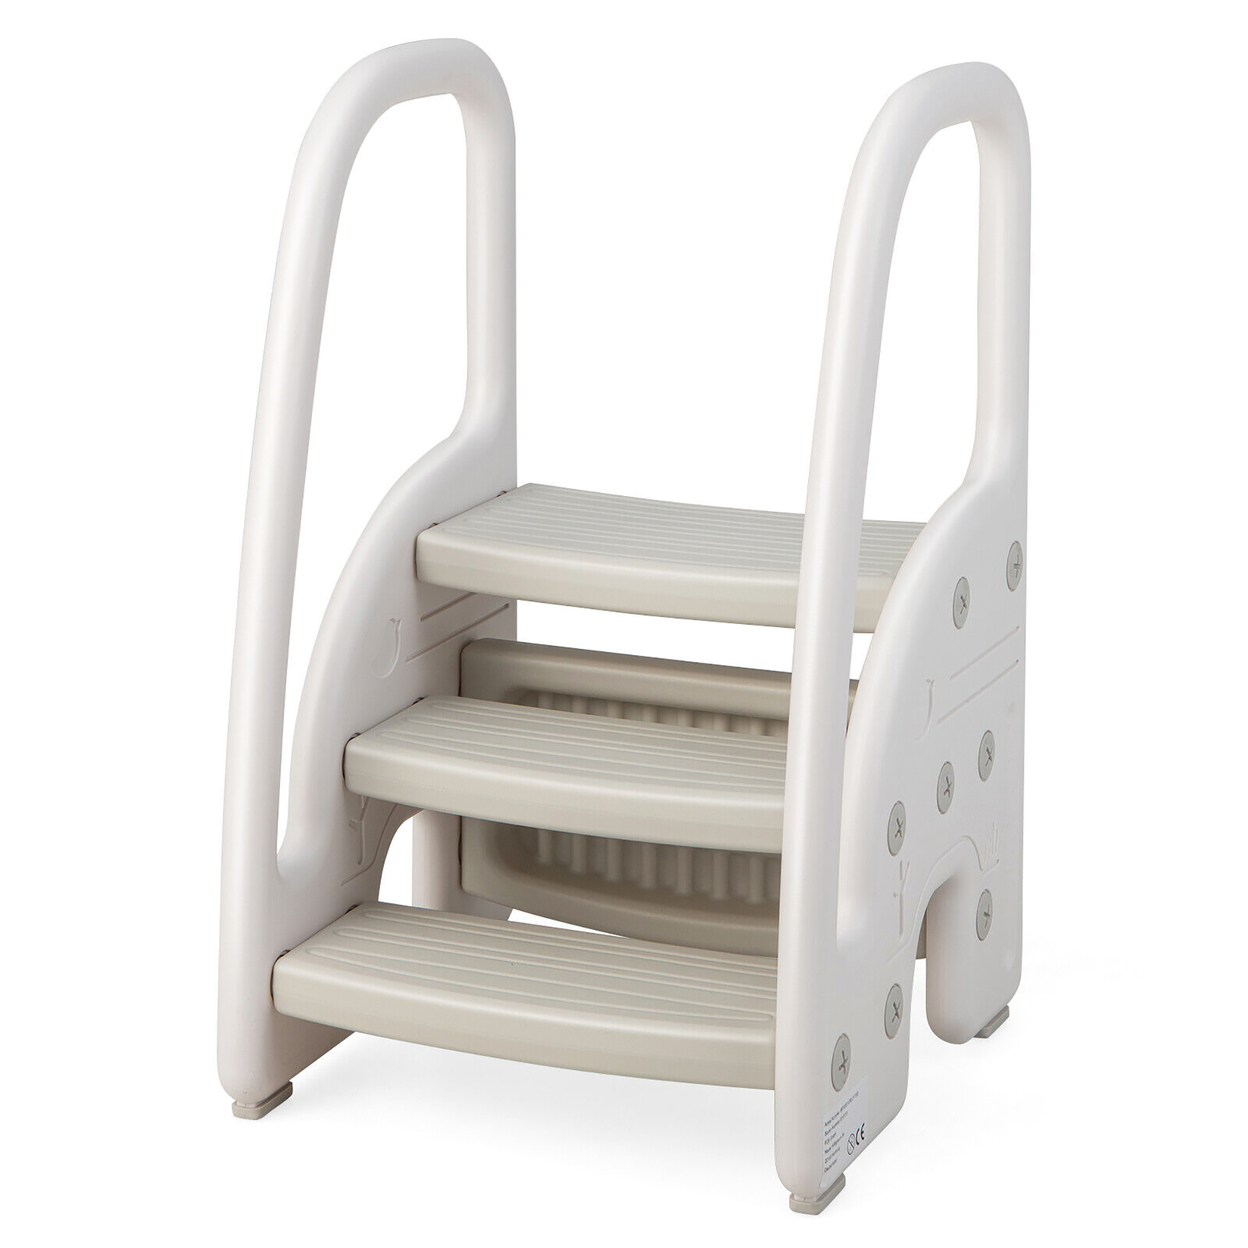 Three-Step Stool For Toddlers Children Step Up Leaning Helper W/Safety Handles - Grey